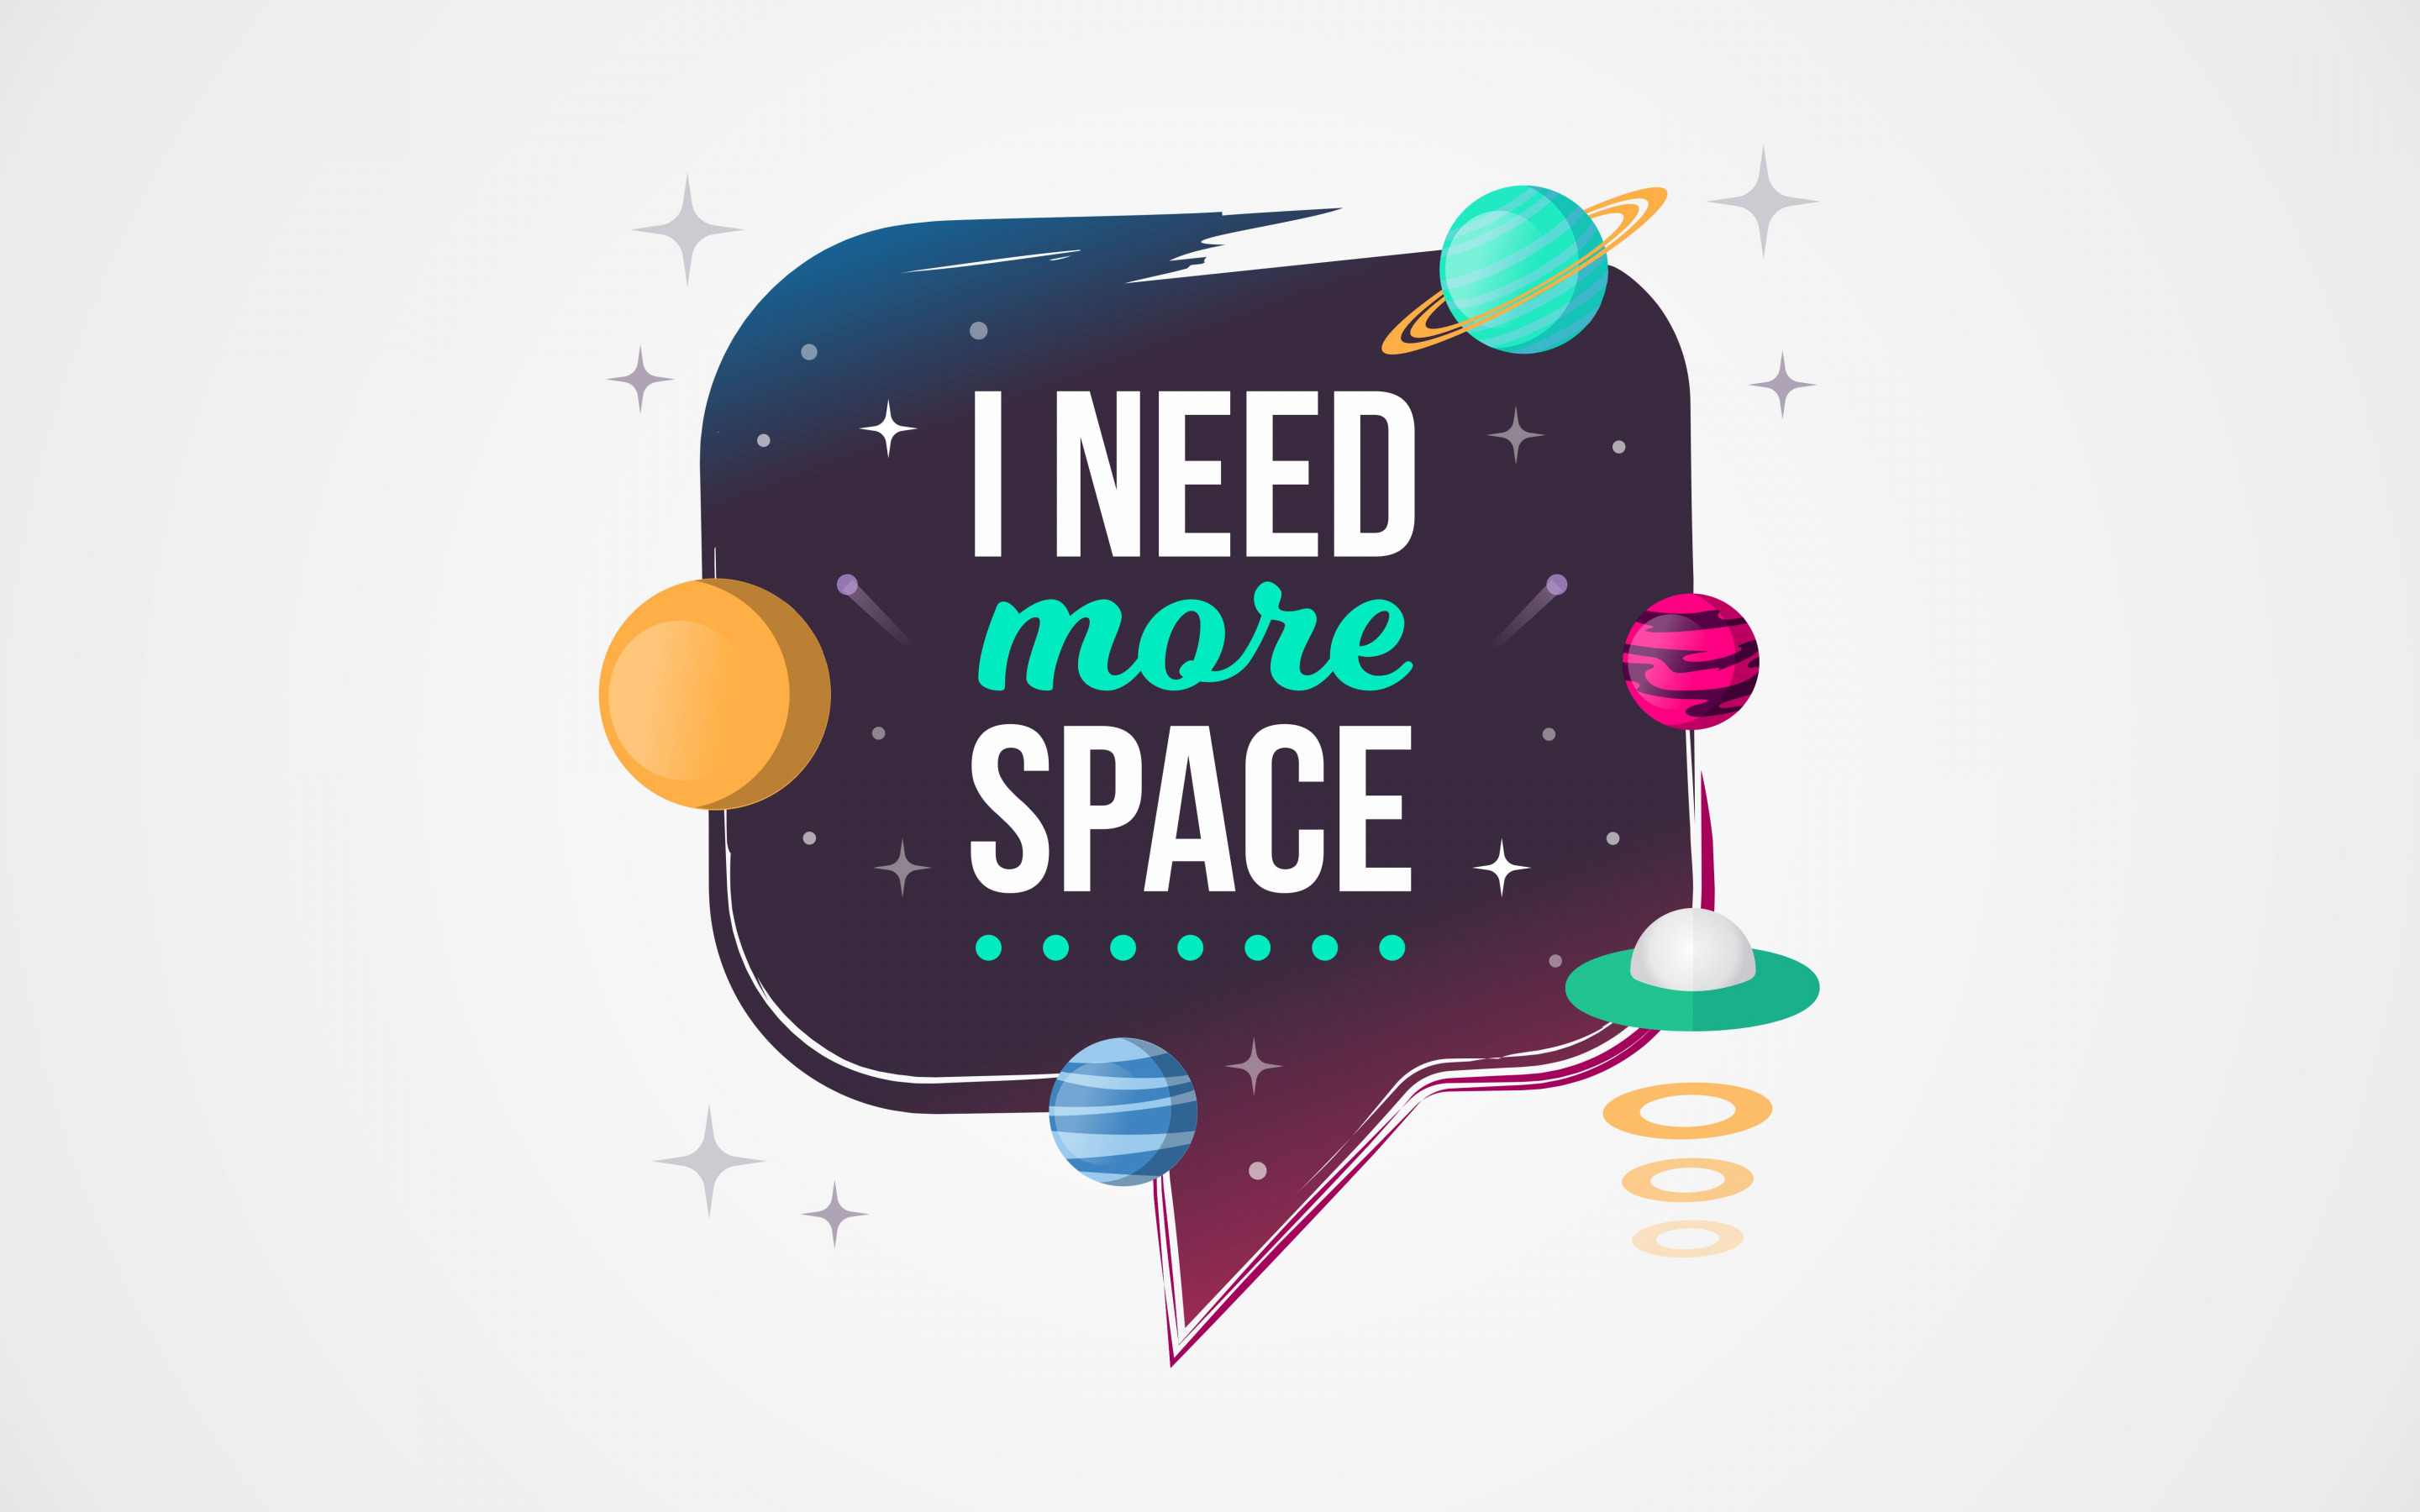 Download wallpaper I need more space, inspiration, creative art, speech bubble for desktop with resolution 2880x1800. High Quality HD picture wallpaper